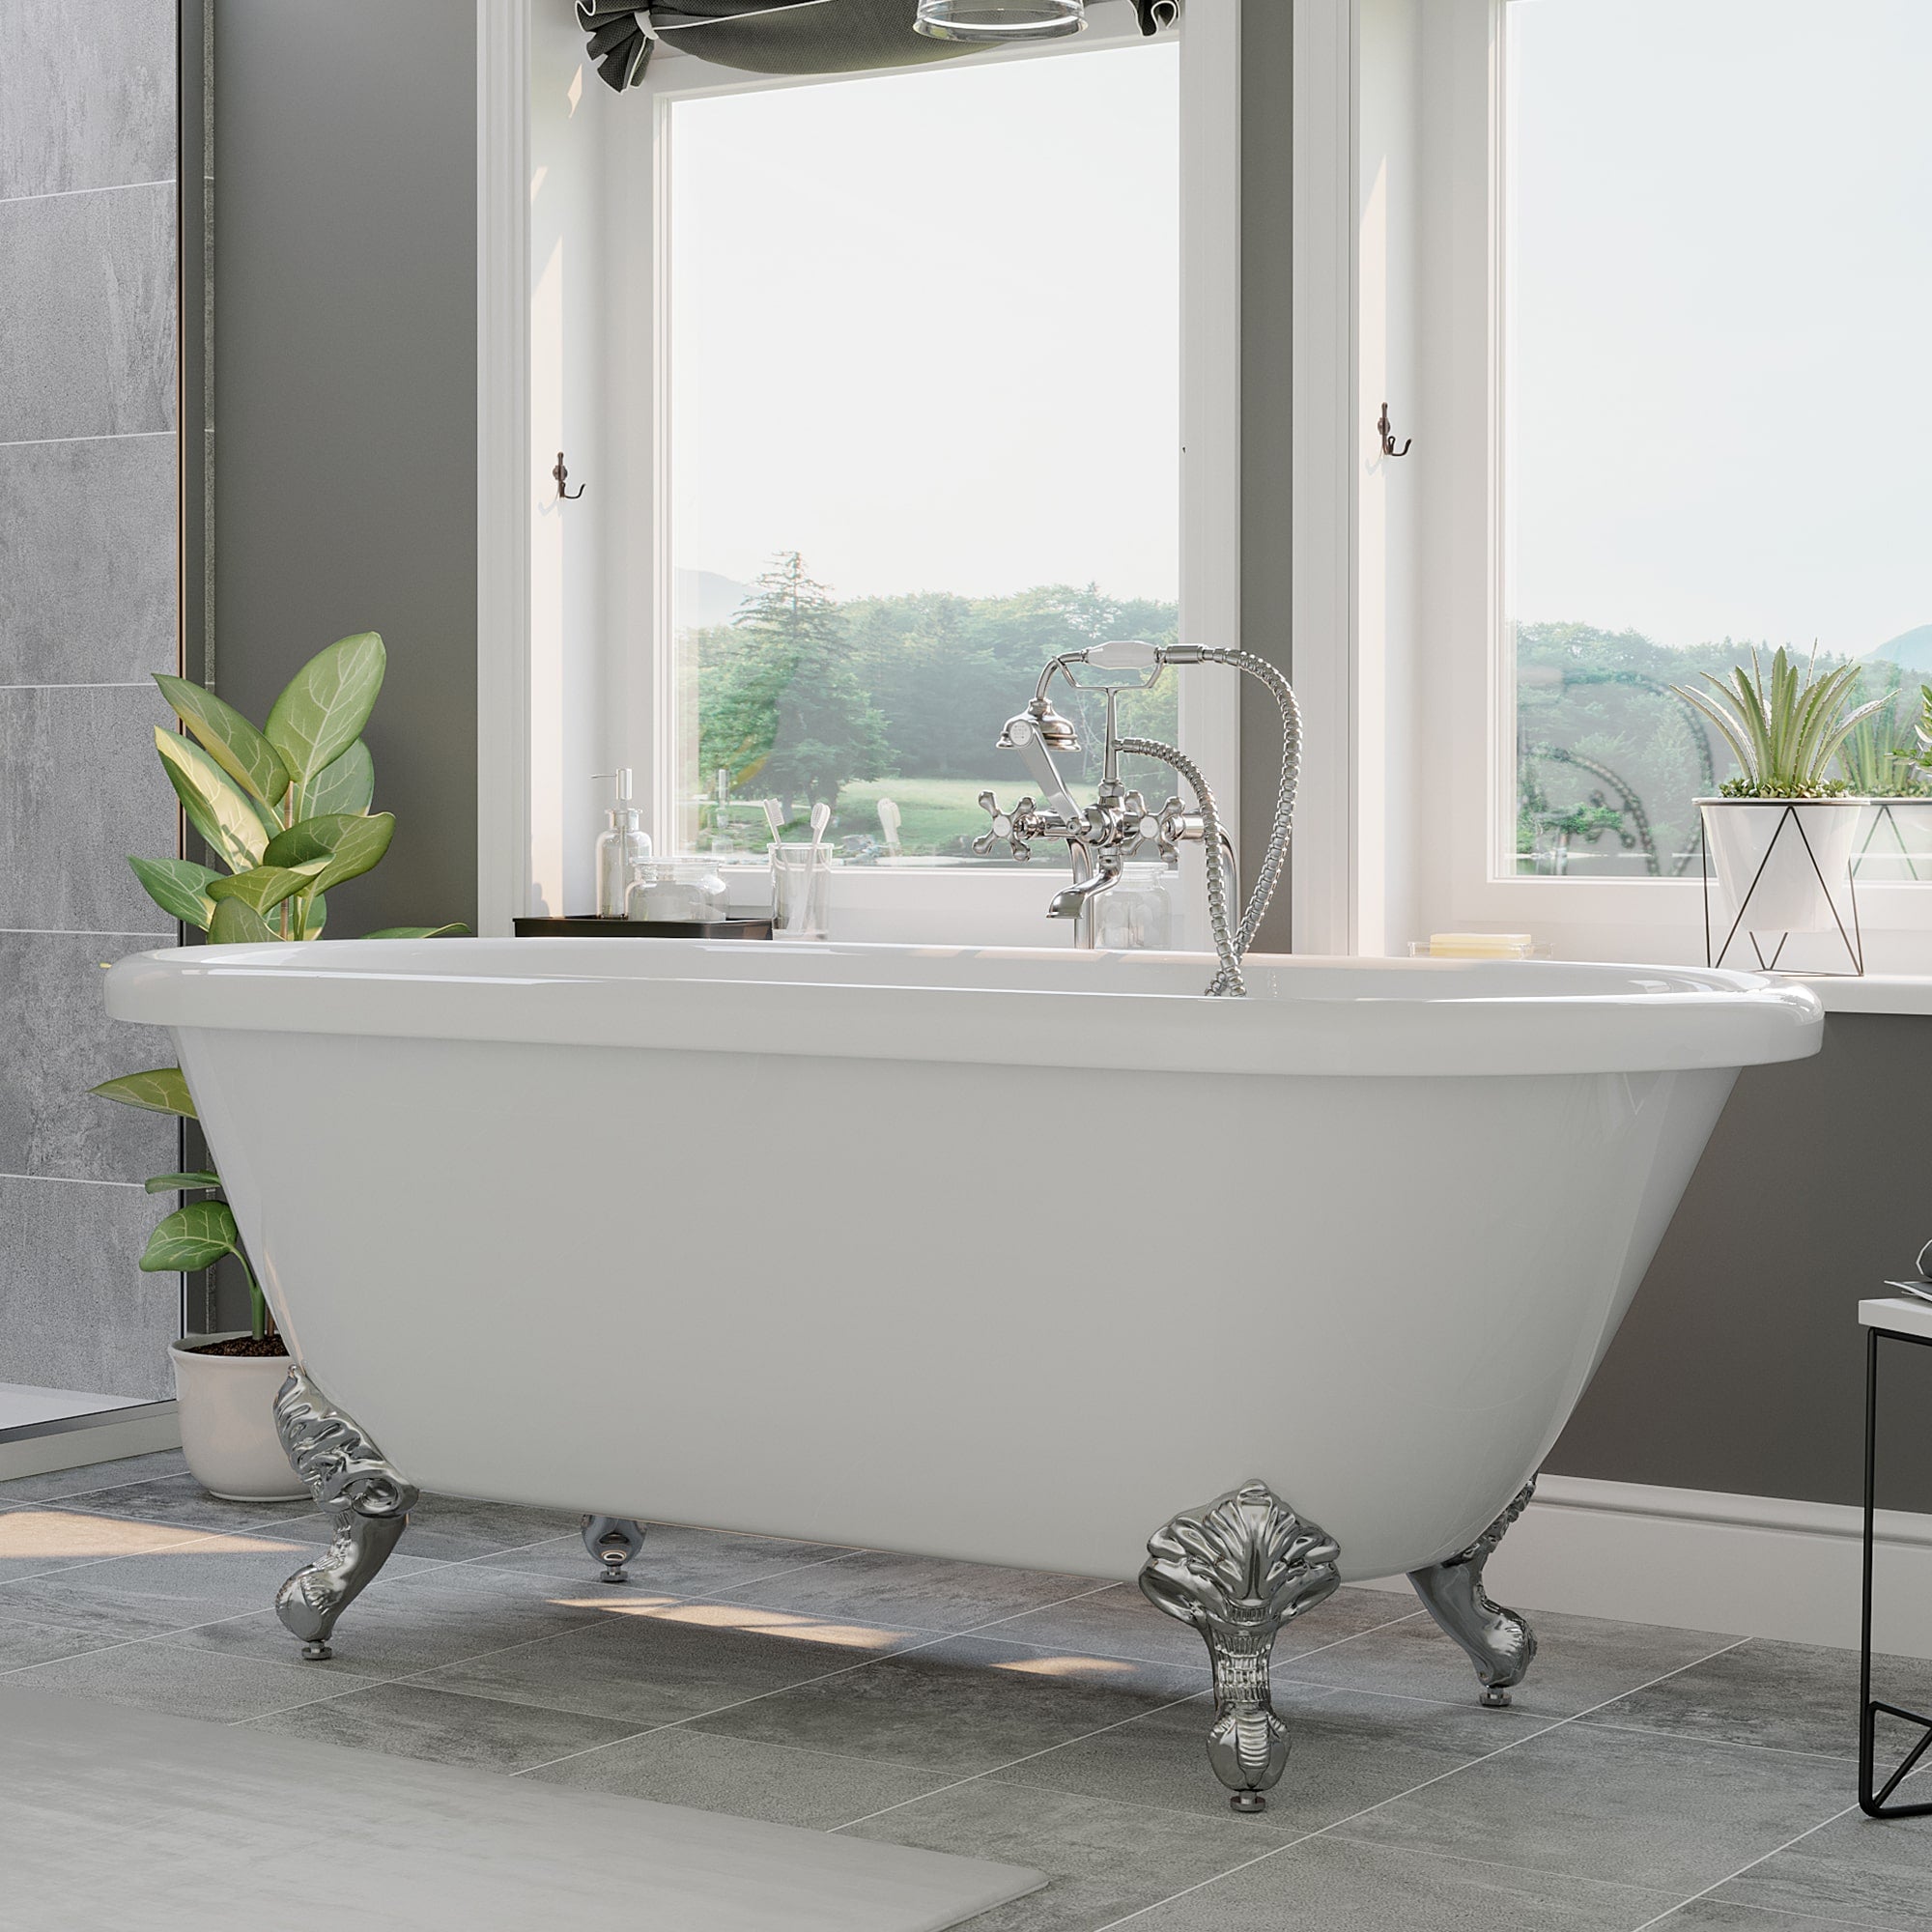 Cambridge Plumbing Double Ended Acrylic Clawfoot Bathtub (White Gloss Finish) with Continuous Rim and Complete Plumbing Package -Brushed nickel ball and claws feet - ADE60-398463-PKG-NH - Vital Hydrotherapy